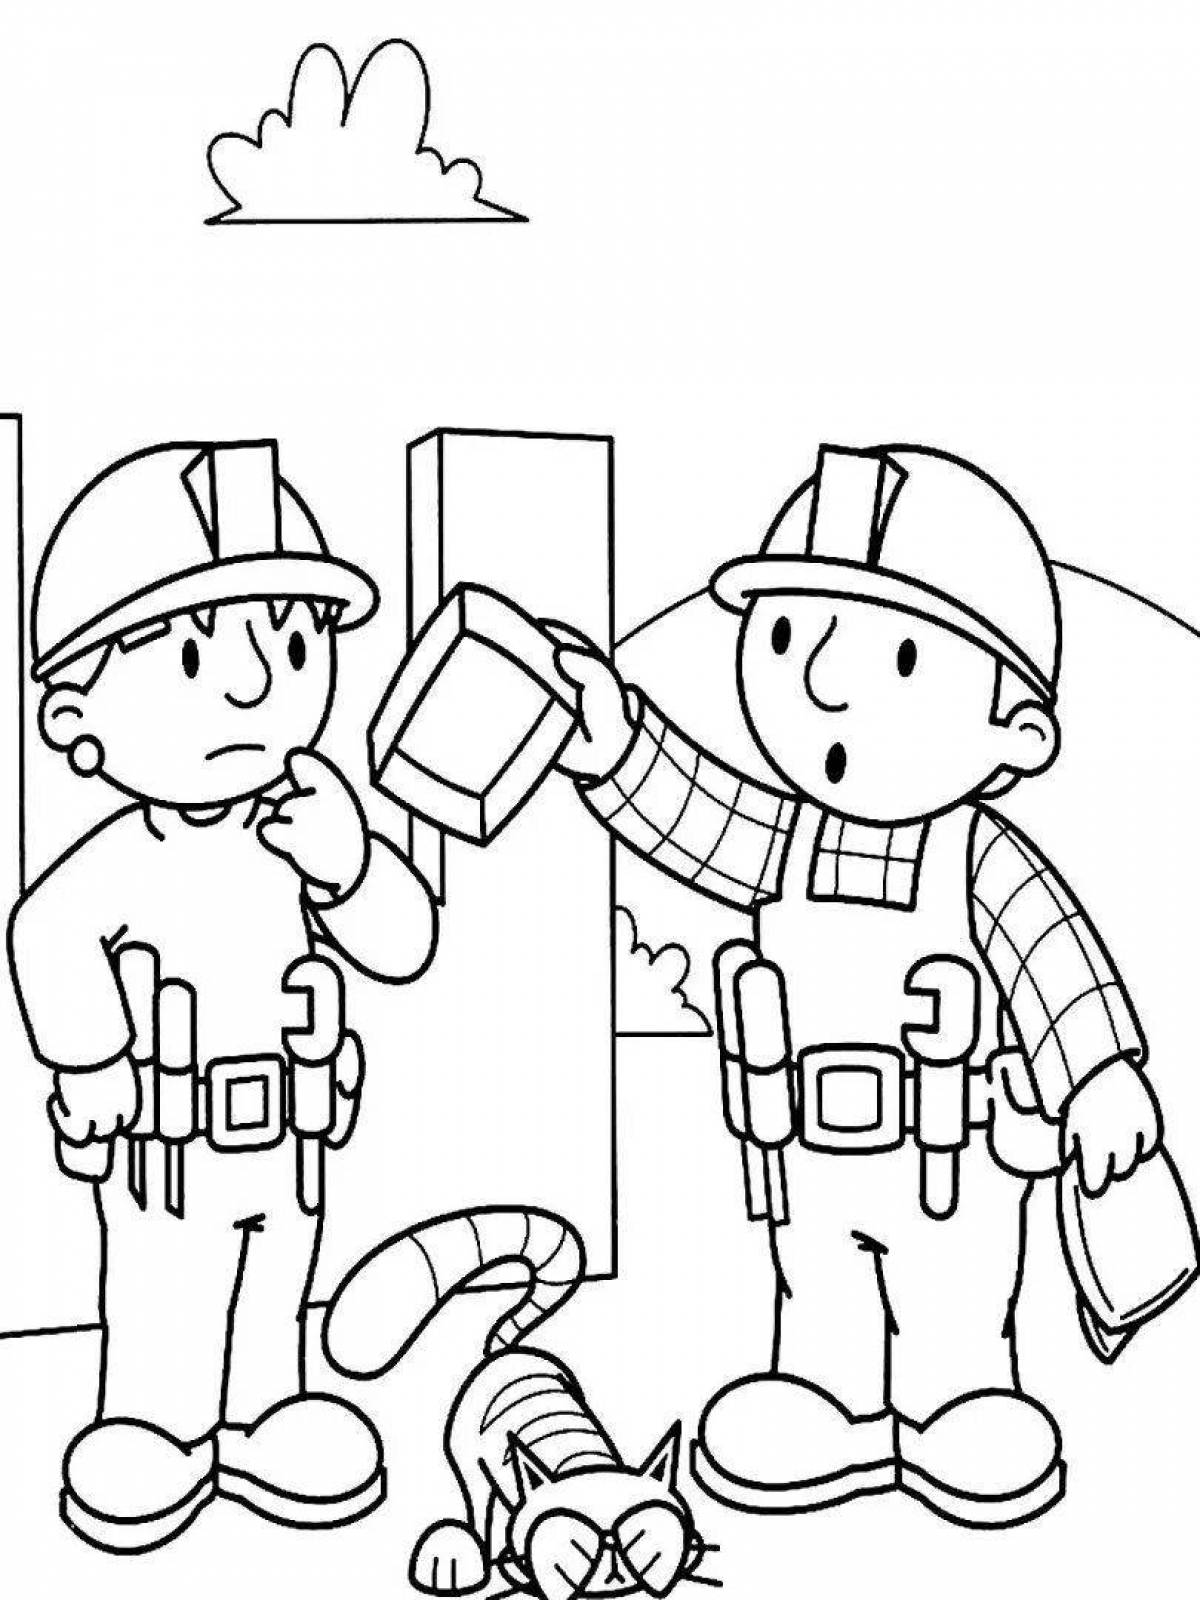 Bright coloring book on labor protection for children